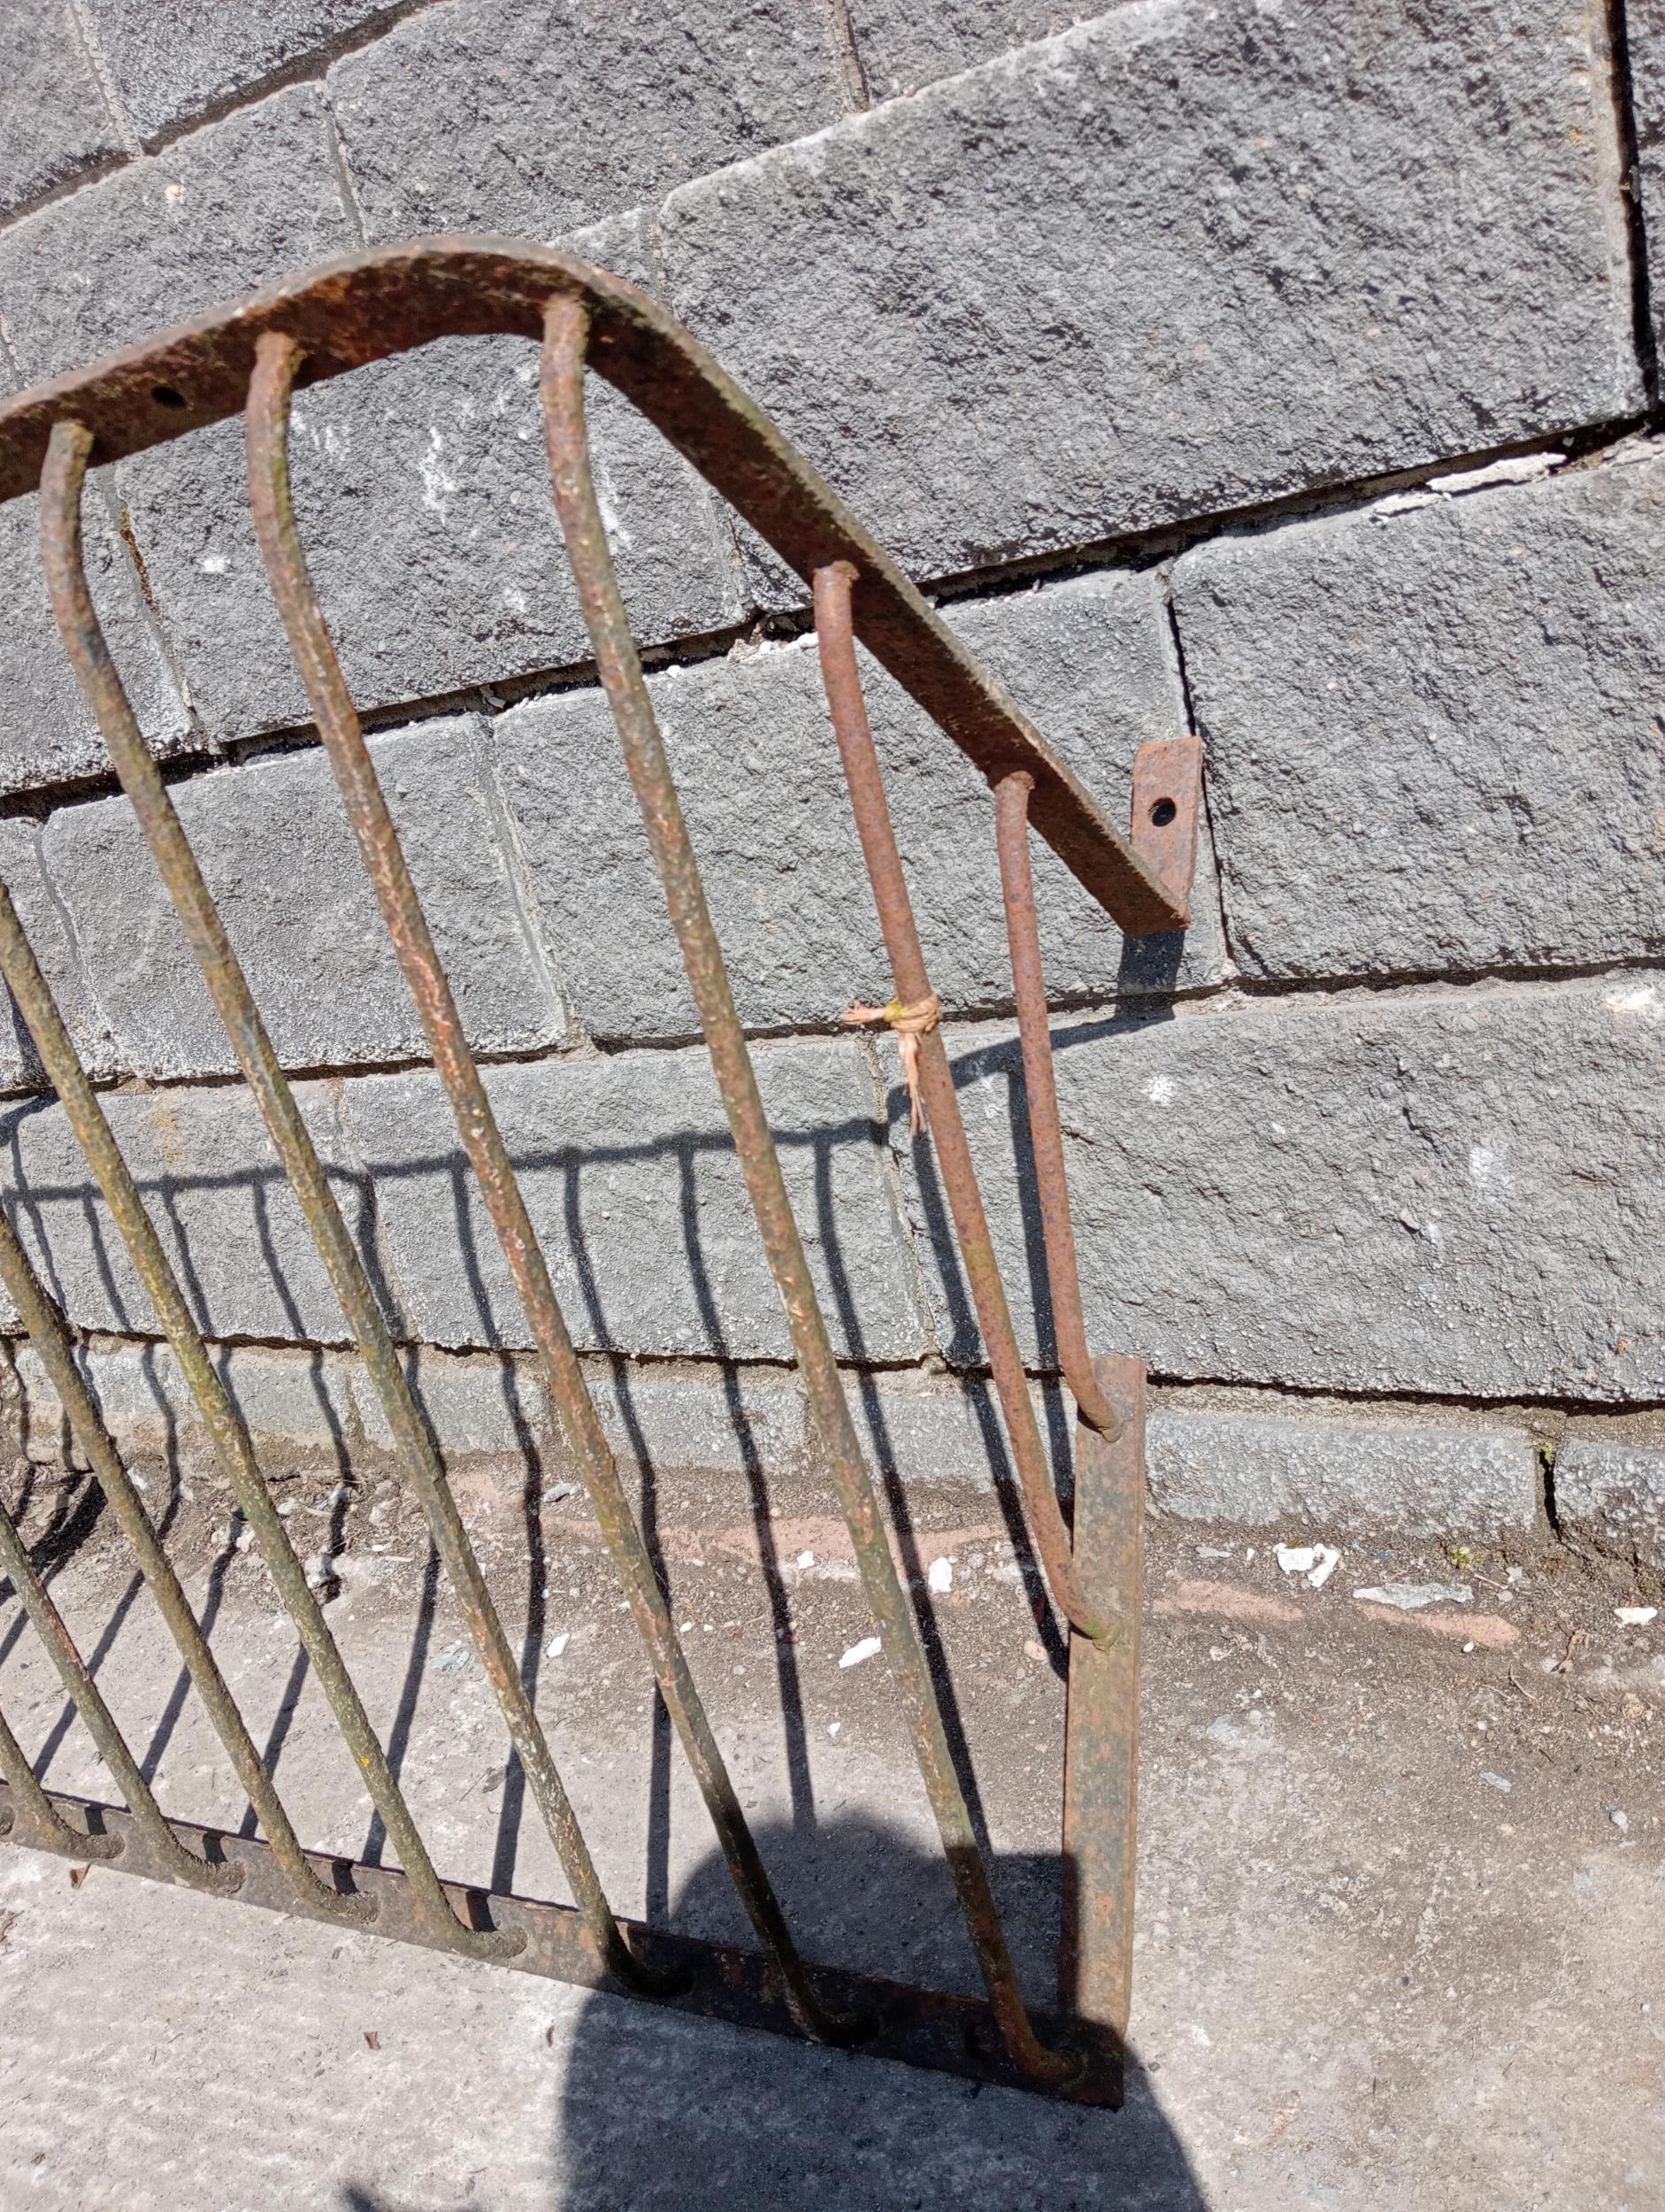 Wrought iron hay feeder rectangle {H 60cm x W 98cm x D 46cm }. (NOT AVAILABLE TO VIEW IN PERSON) - Image 4 of 4